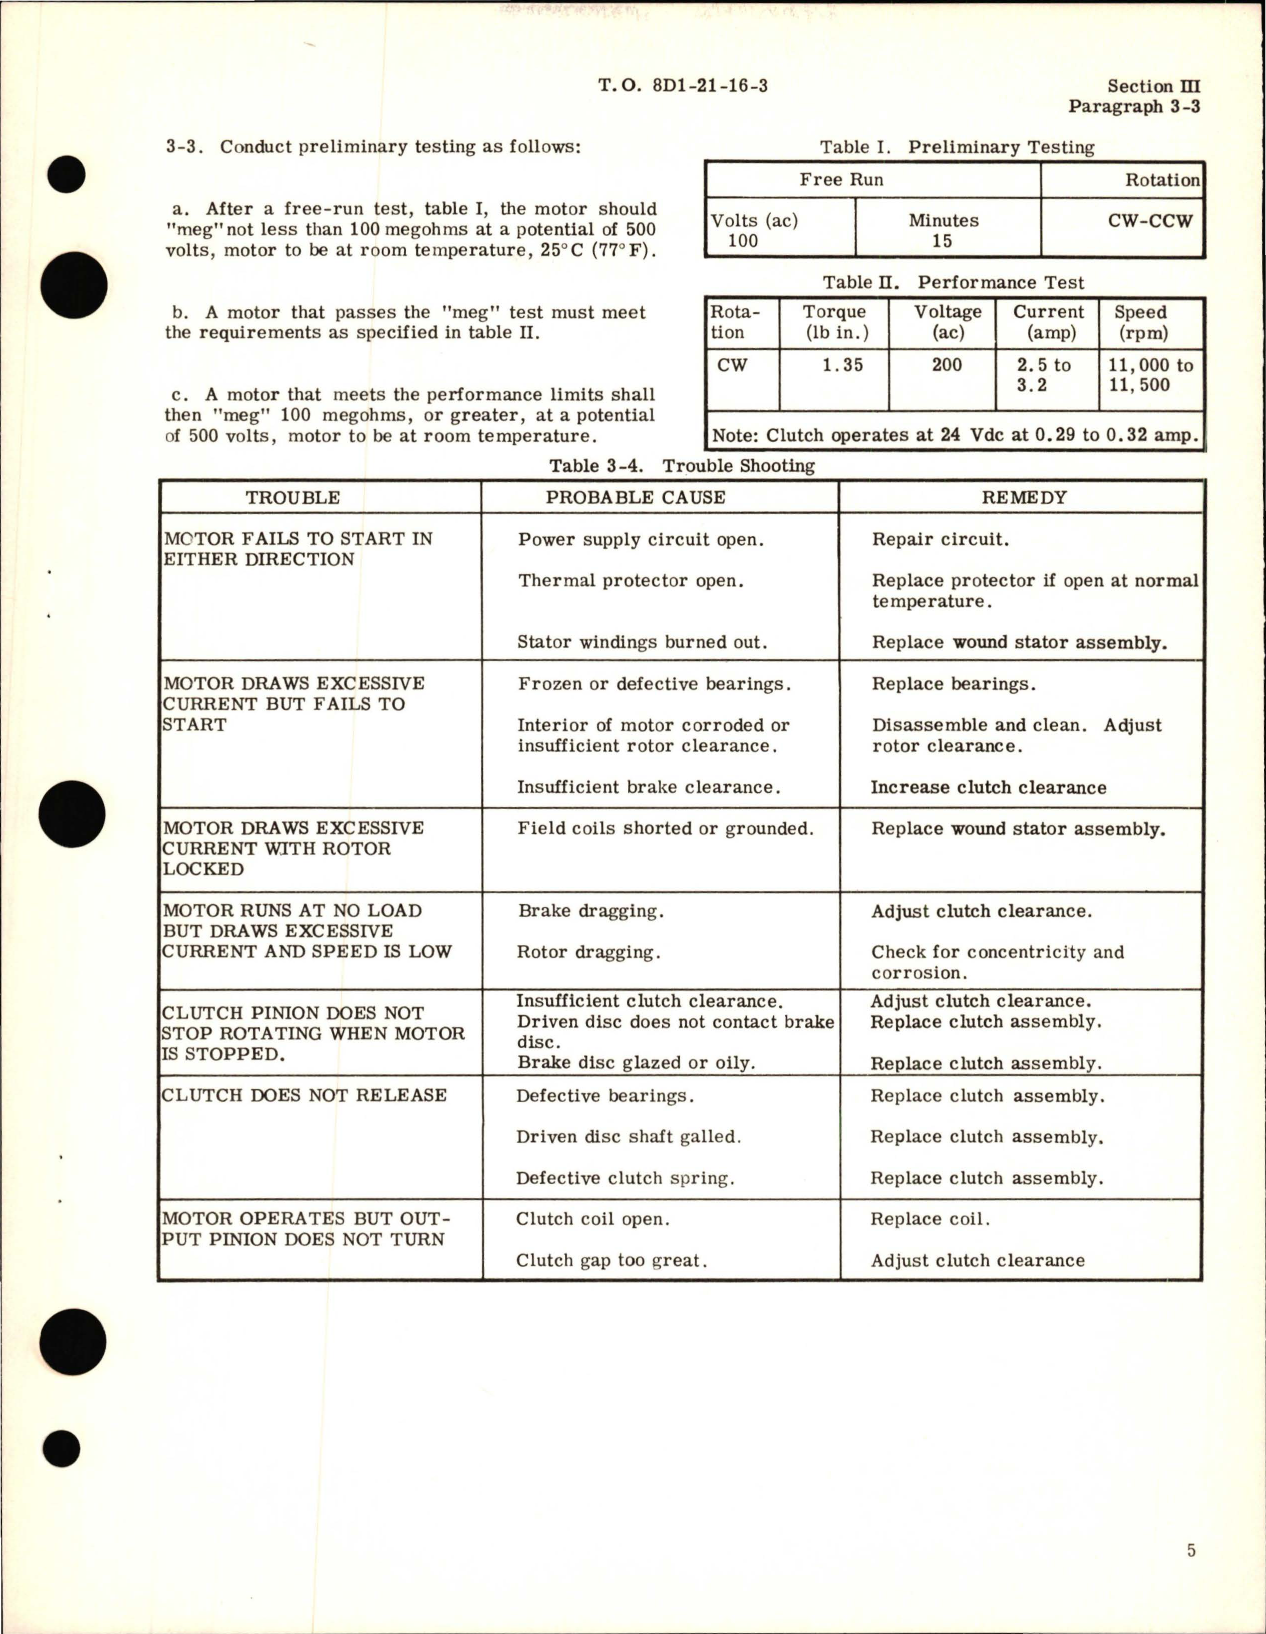 Sample page 7 from AirCorps Library document: Overhaul Instructions for Fractional Horsepower Electric Motors P Frame Series 